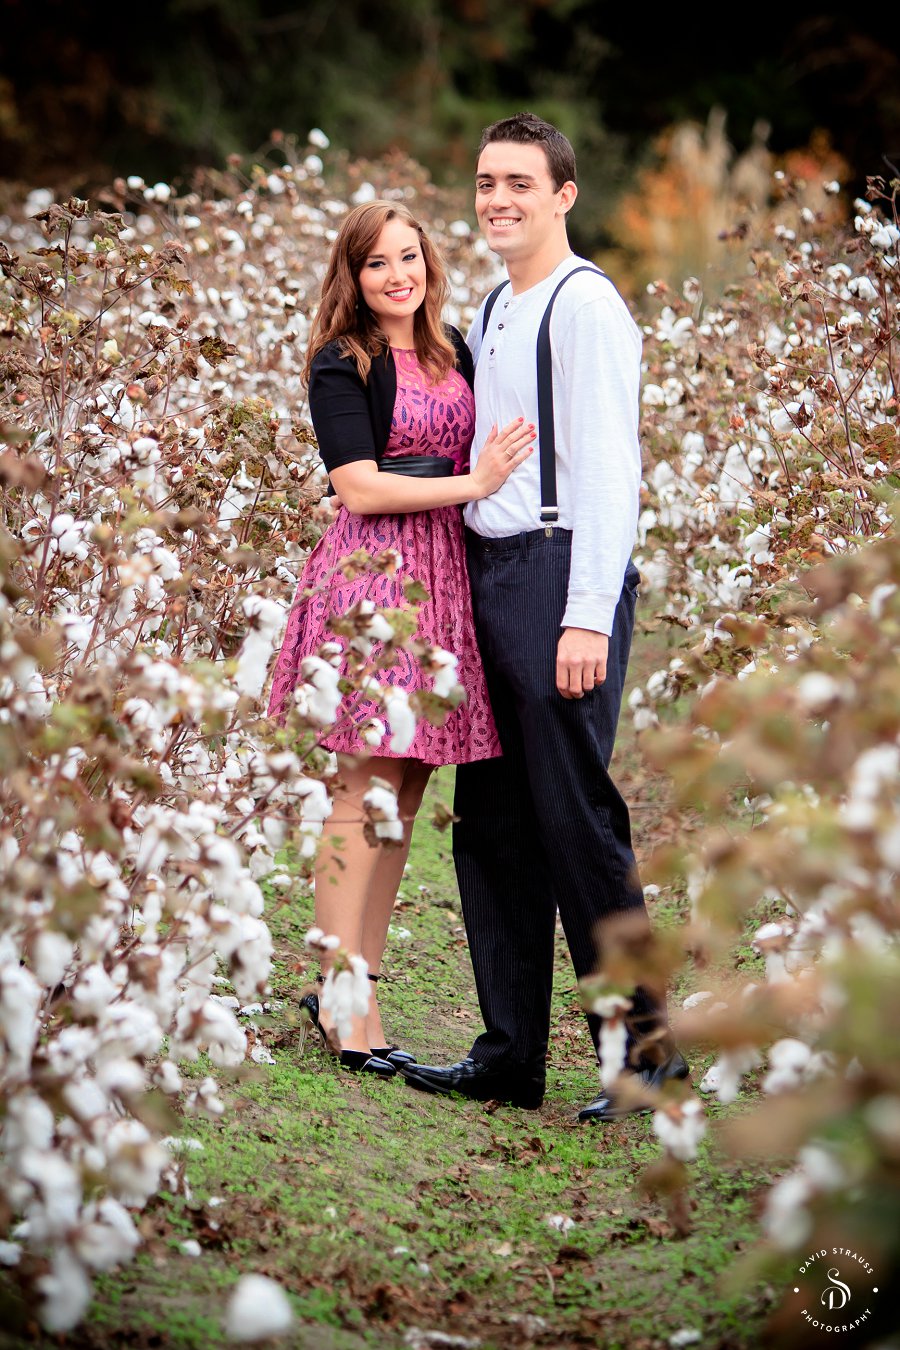 Boone Hall Engagement Pictures - Charleston Wedding Photographer David Strauss - Morgan and Andrew - 1